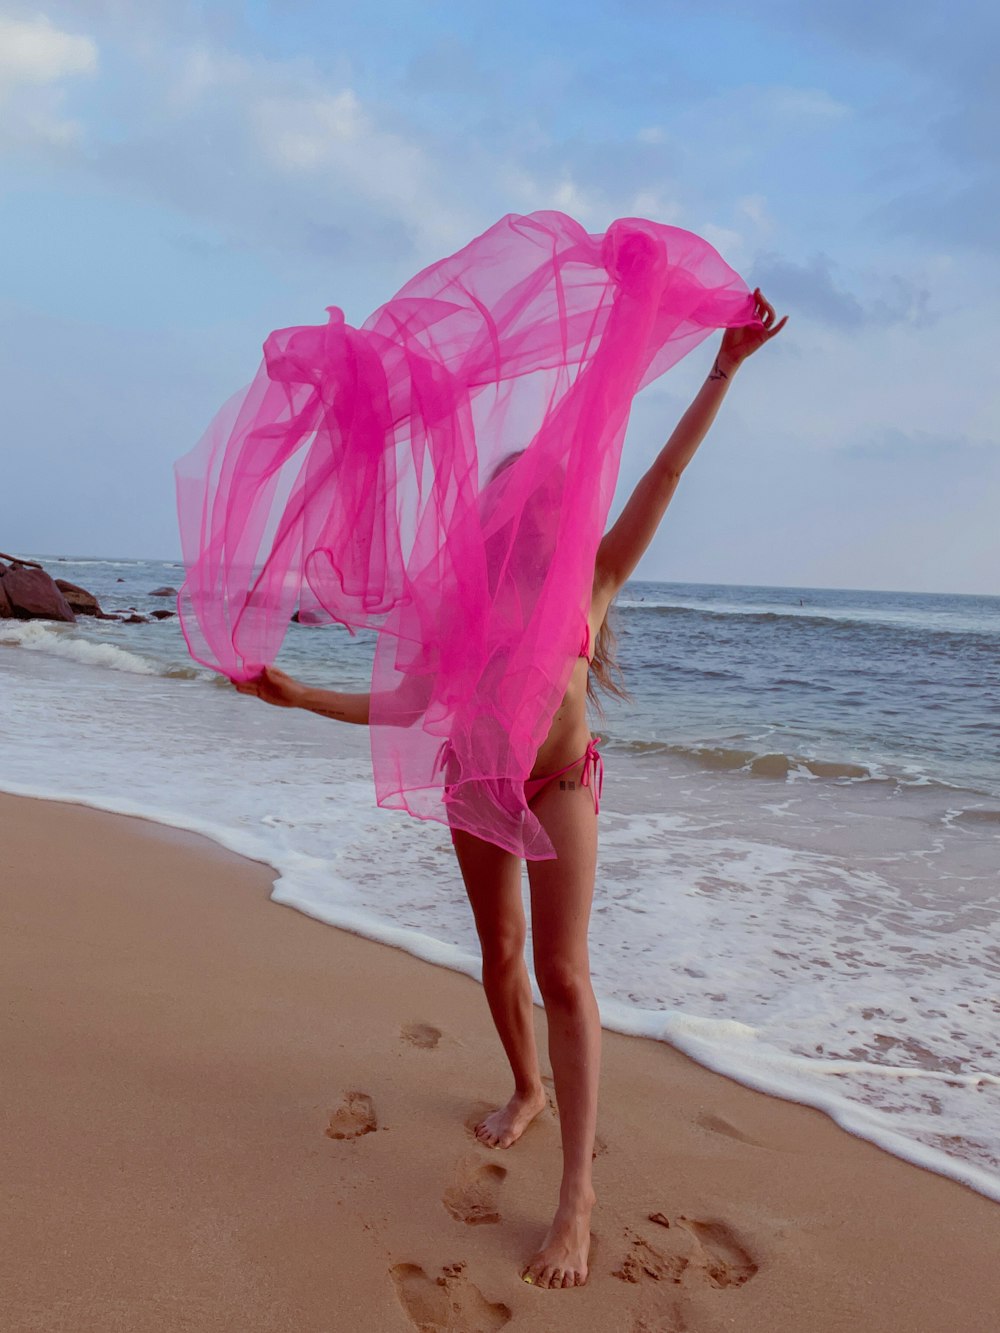 a young girl in a pink dress on the beach